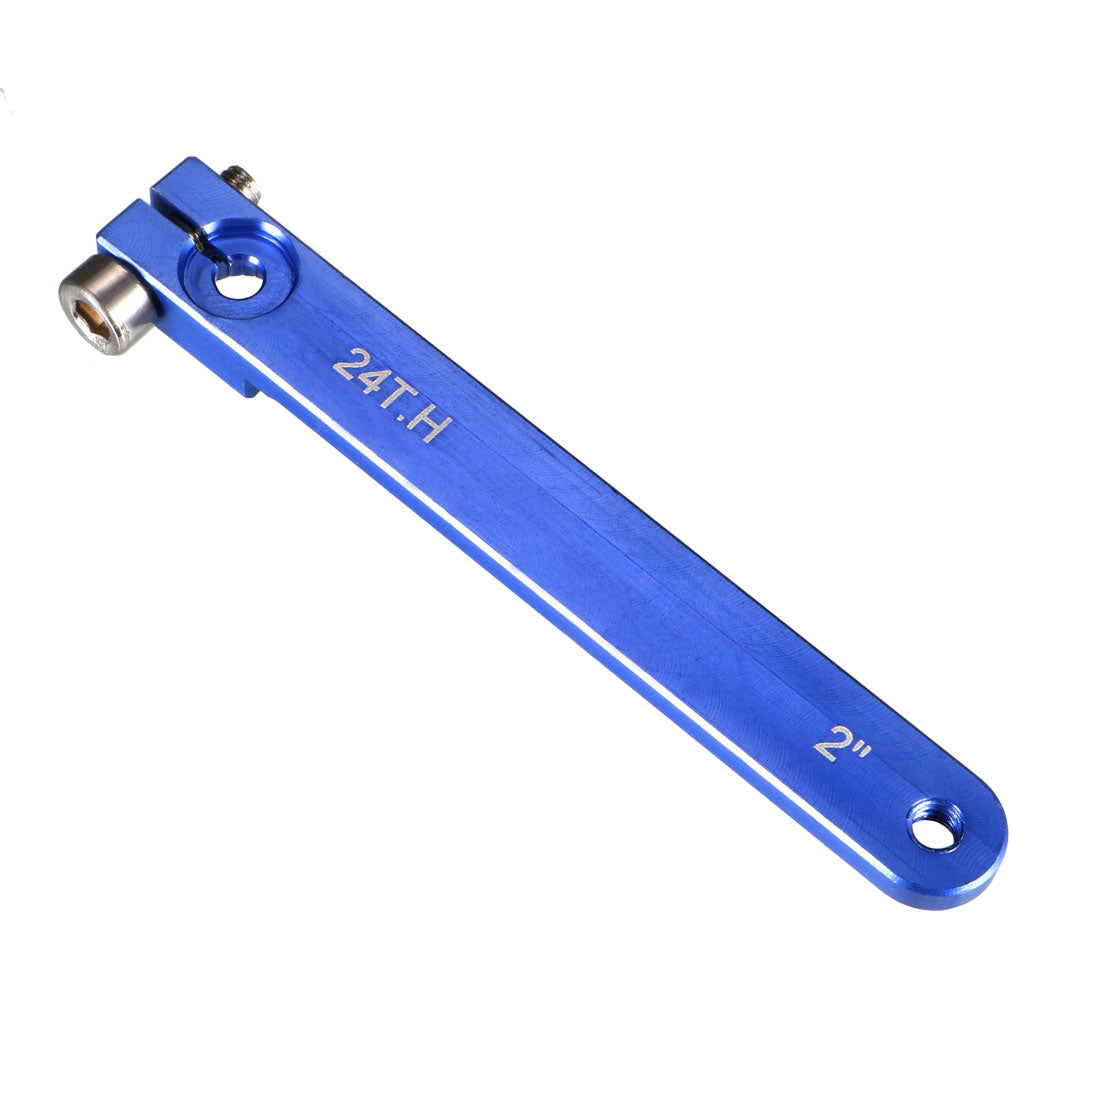 uxcell Uxcell Aluminum Servo Arms Single Arm 24T M3 Thread Blue, for 2 Inch